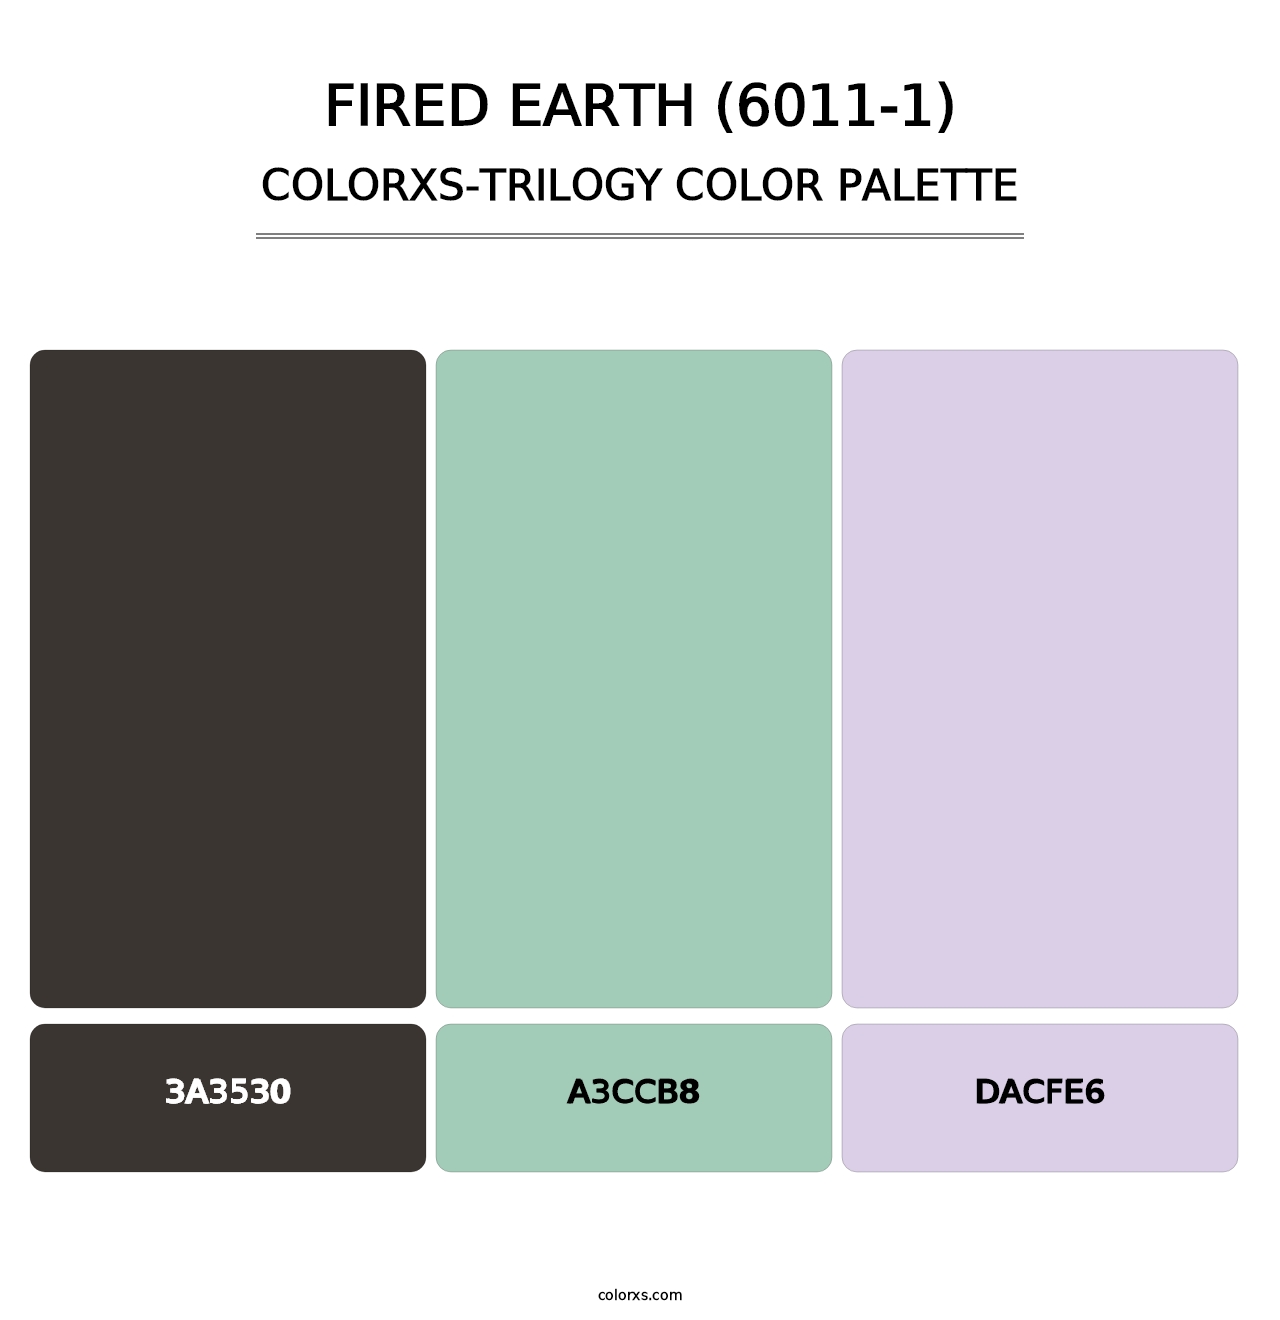 Fired Earth (6011-1) - Colorxs Trilogy Palette